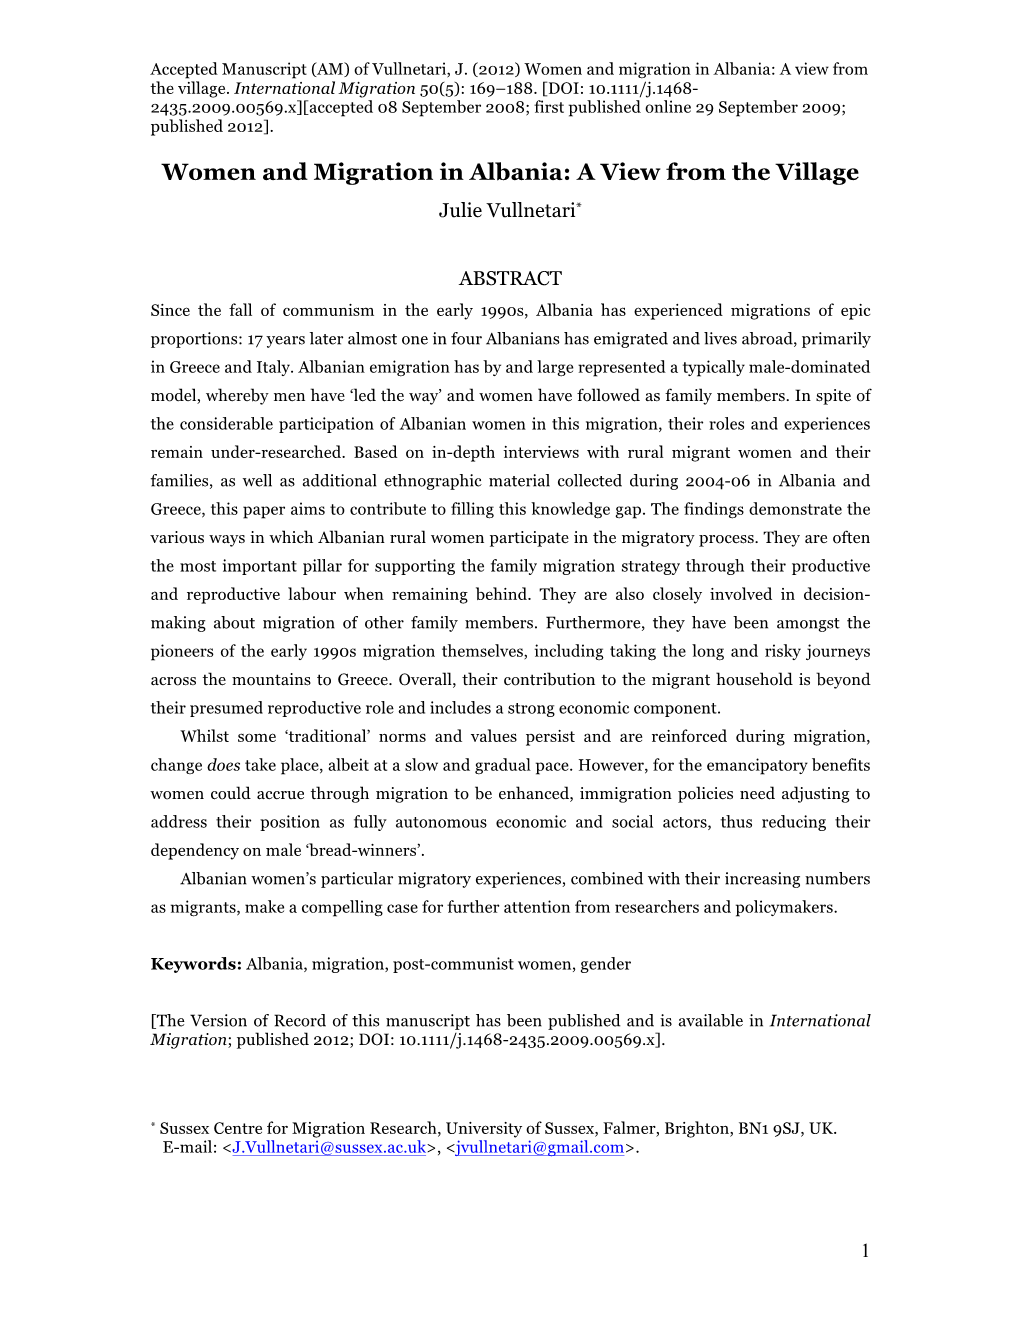 Women and Migration in Albania: a View from the Village